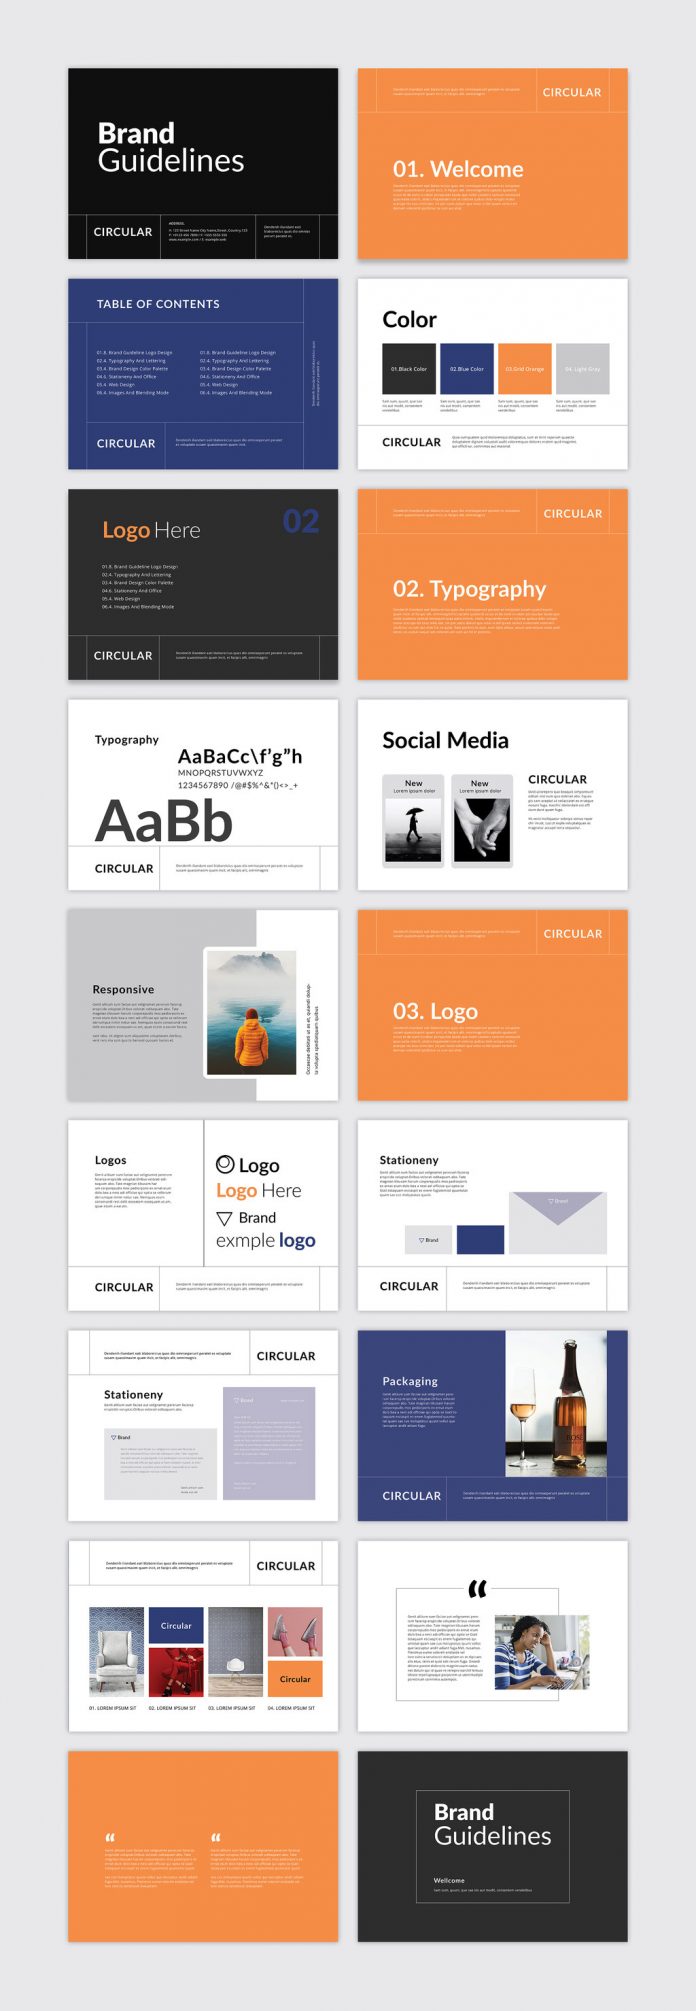 Download this Brand Guidelines Template for Your Identity Projects